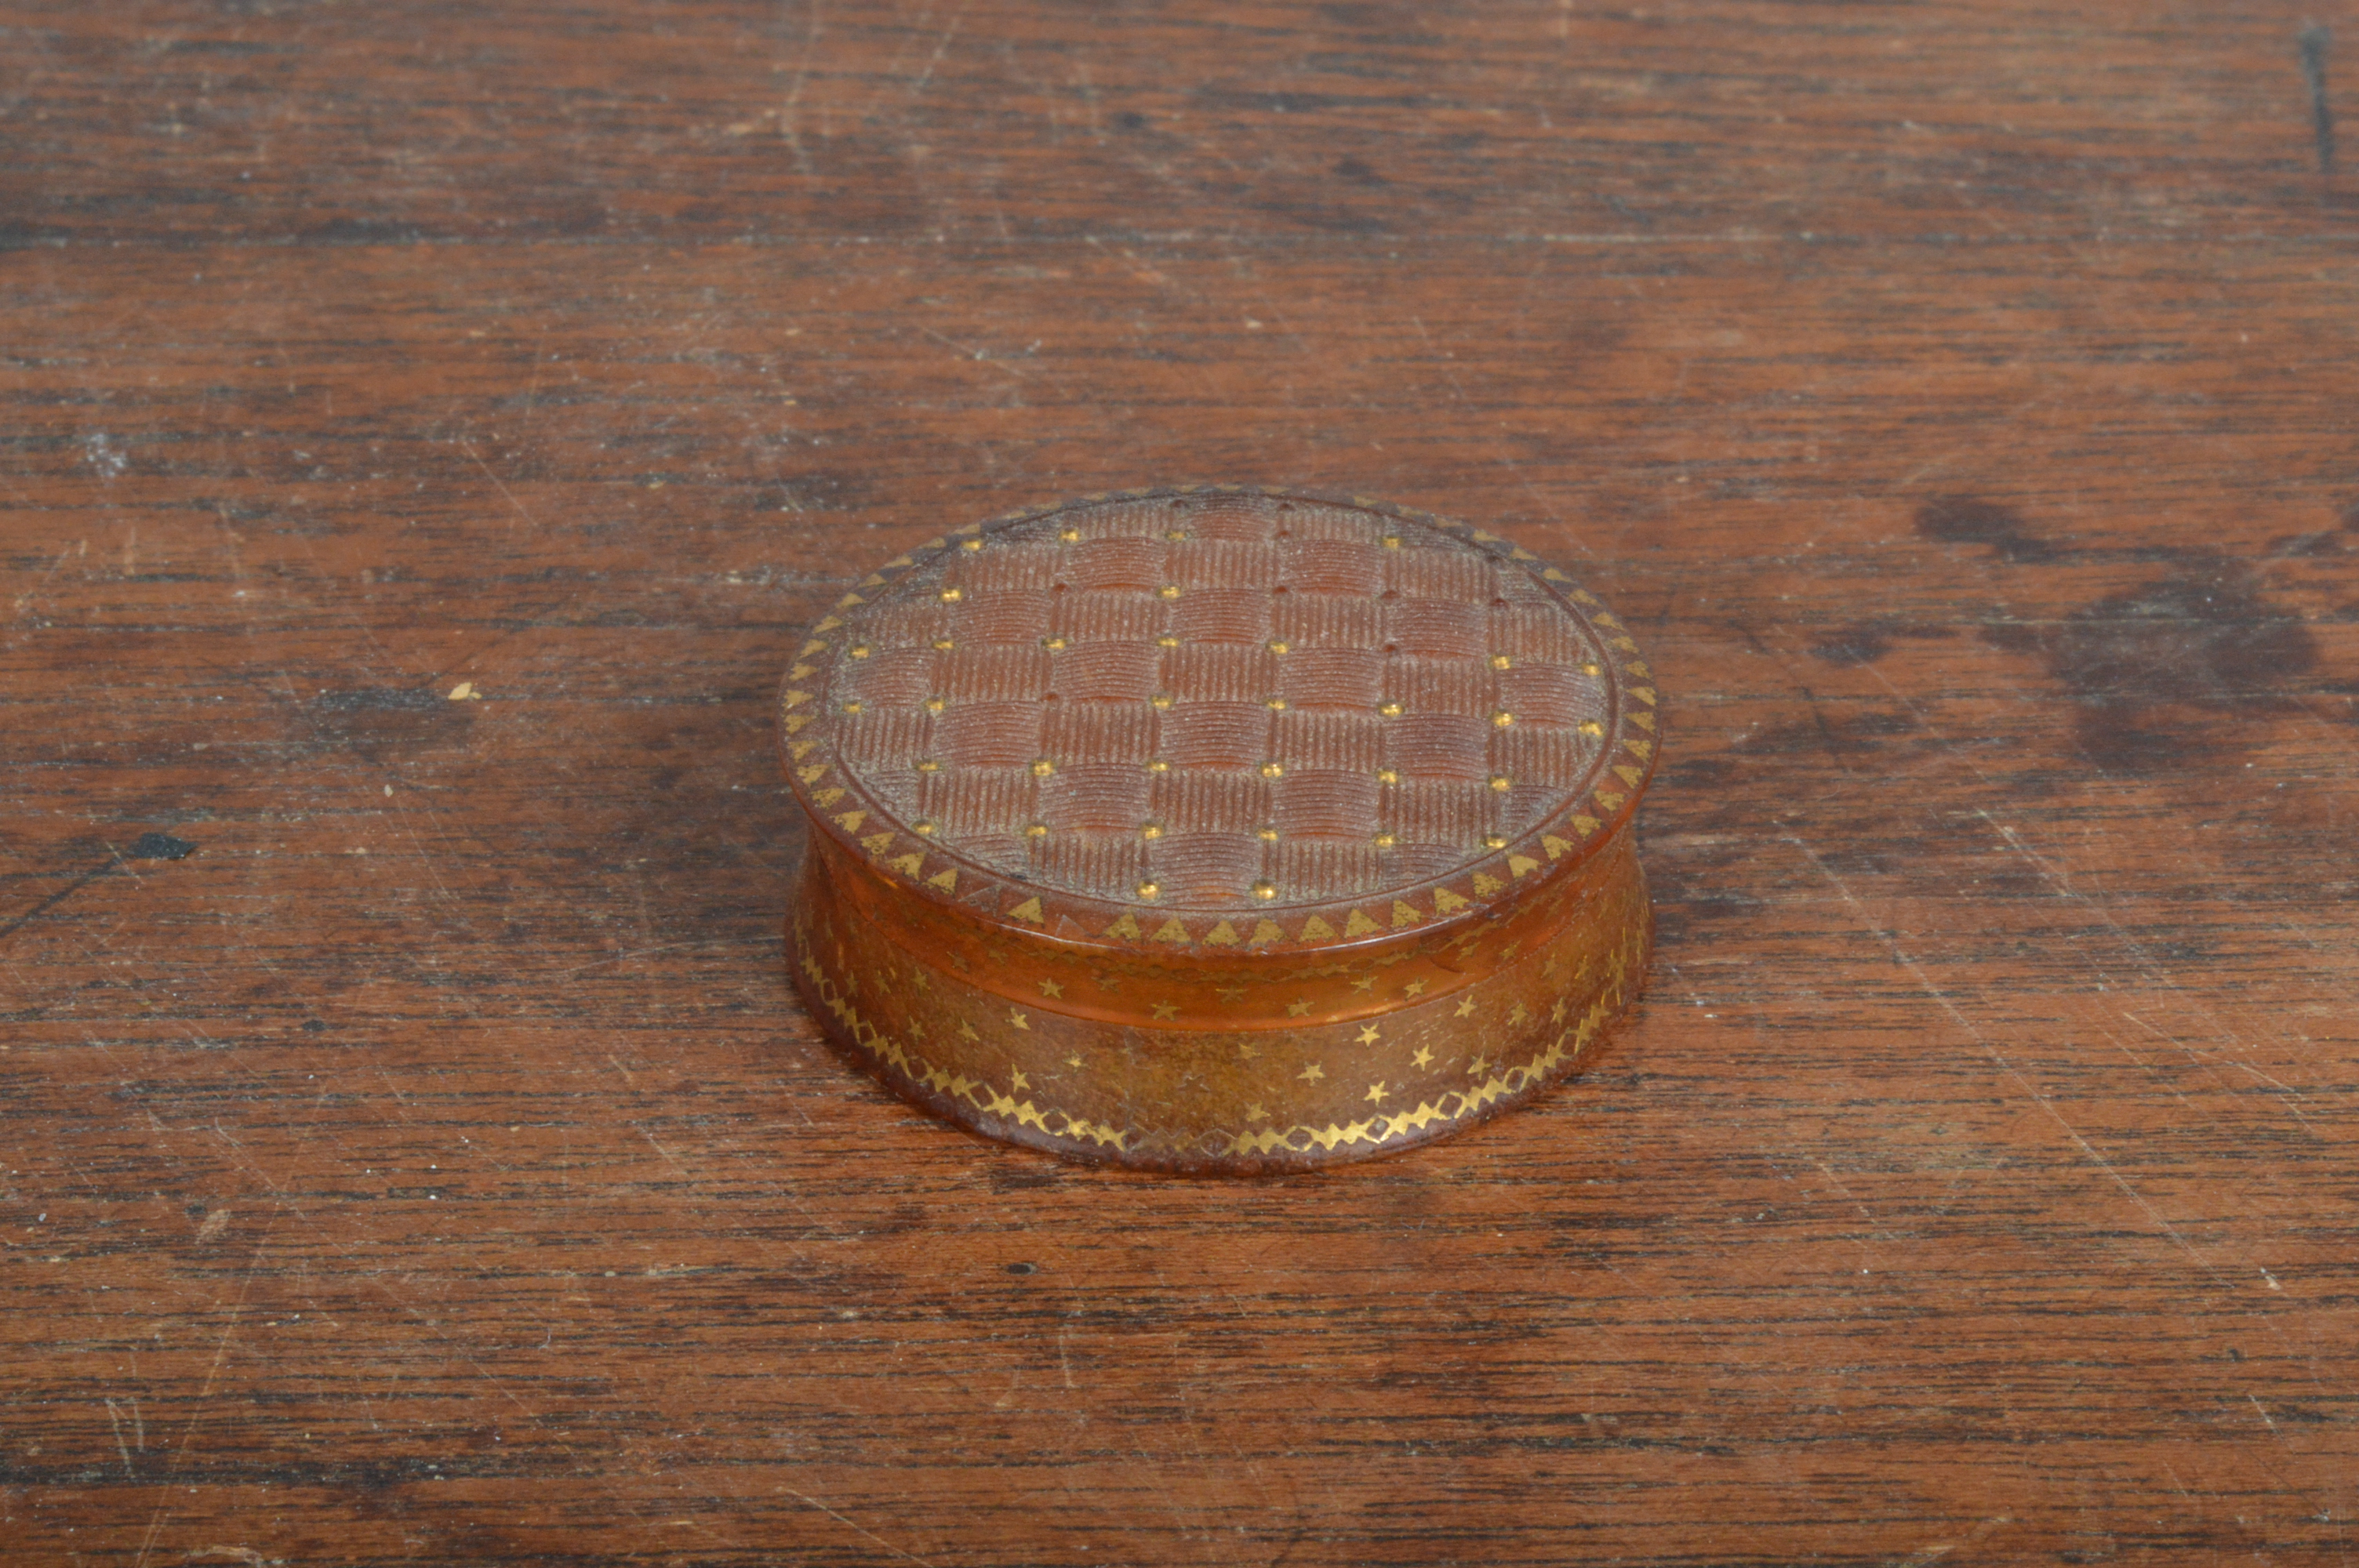 A fine 19th century pique ware circular box and cover, made of tortoiseshell with gold inlay. 4 cm